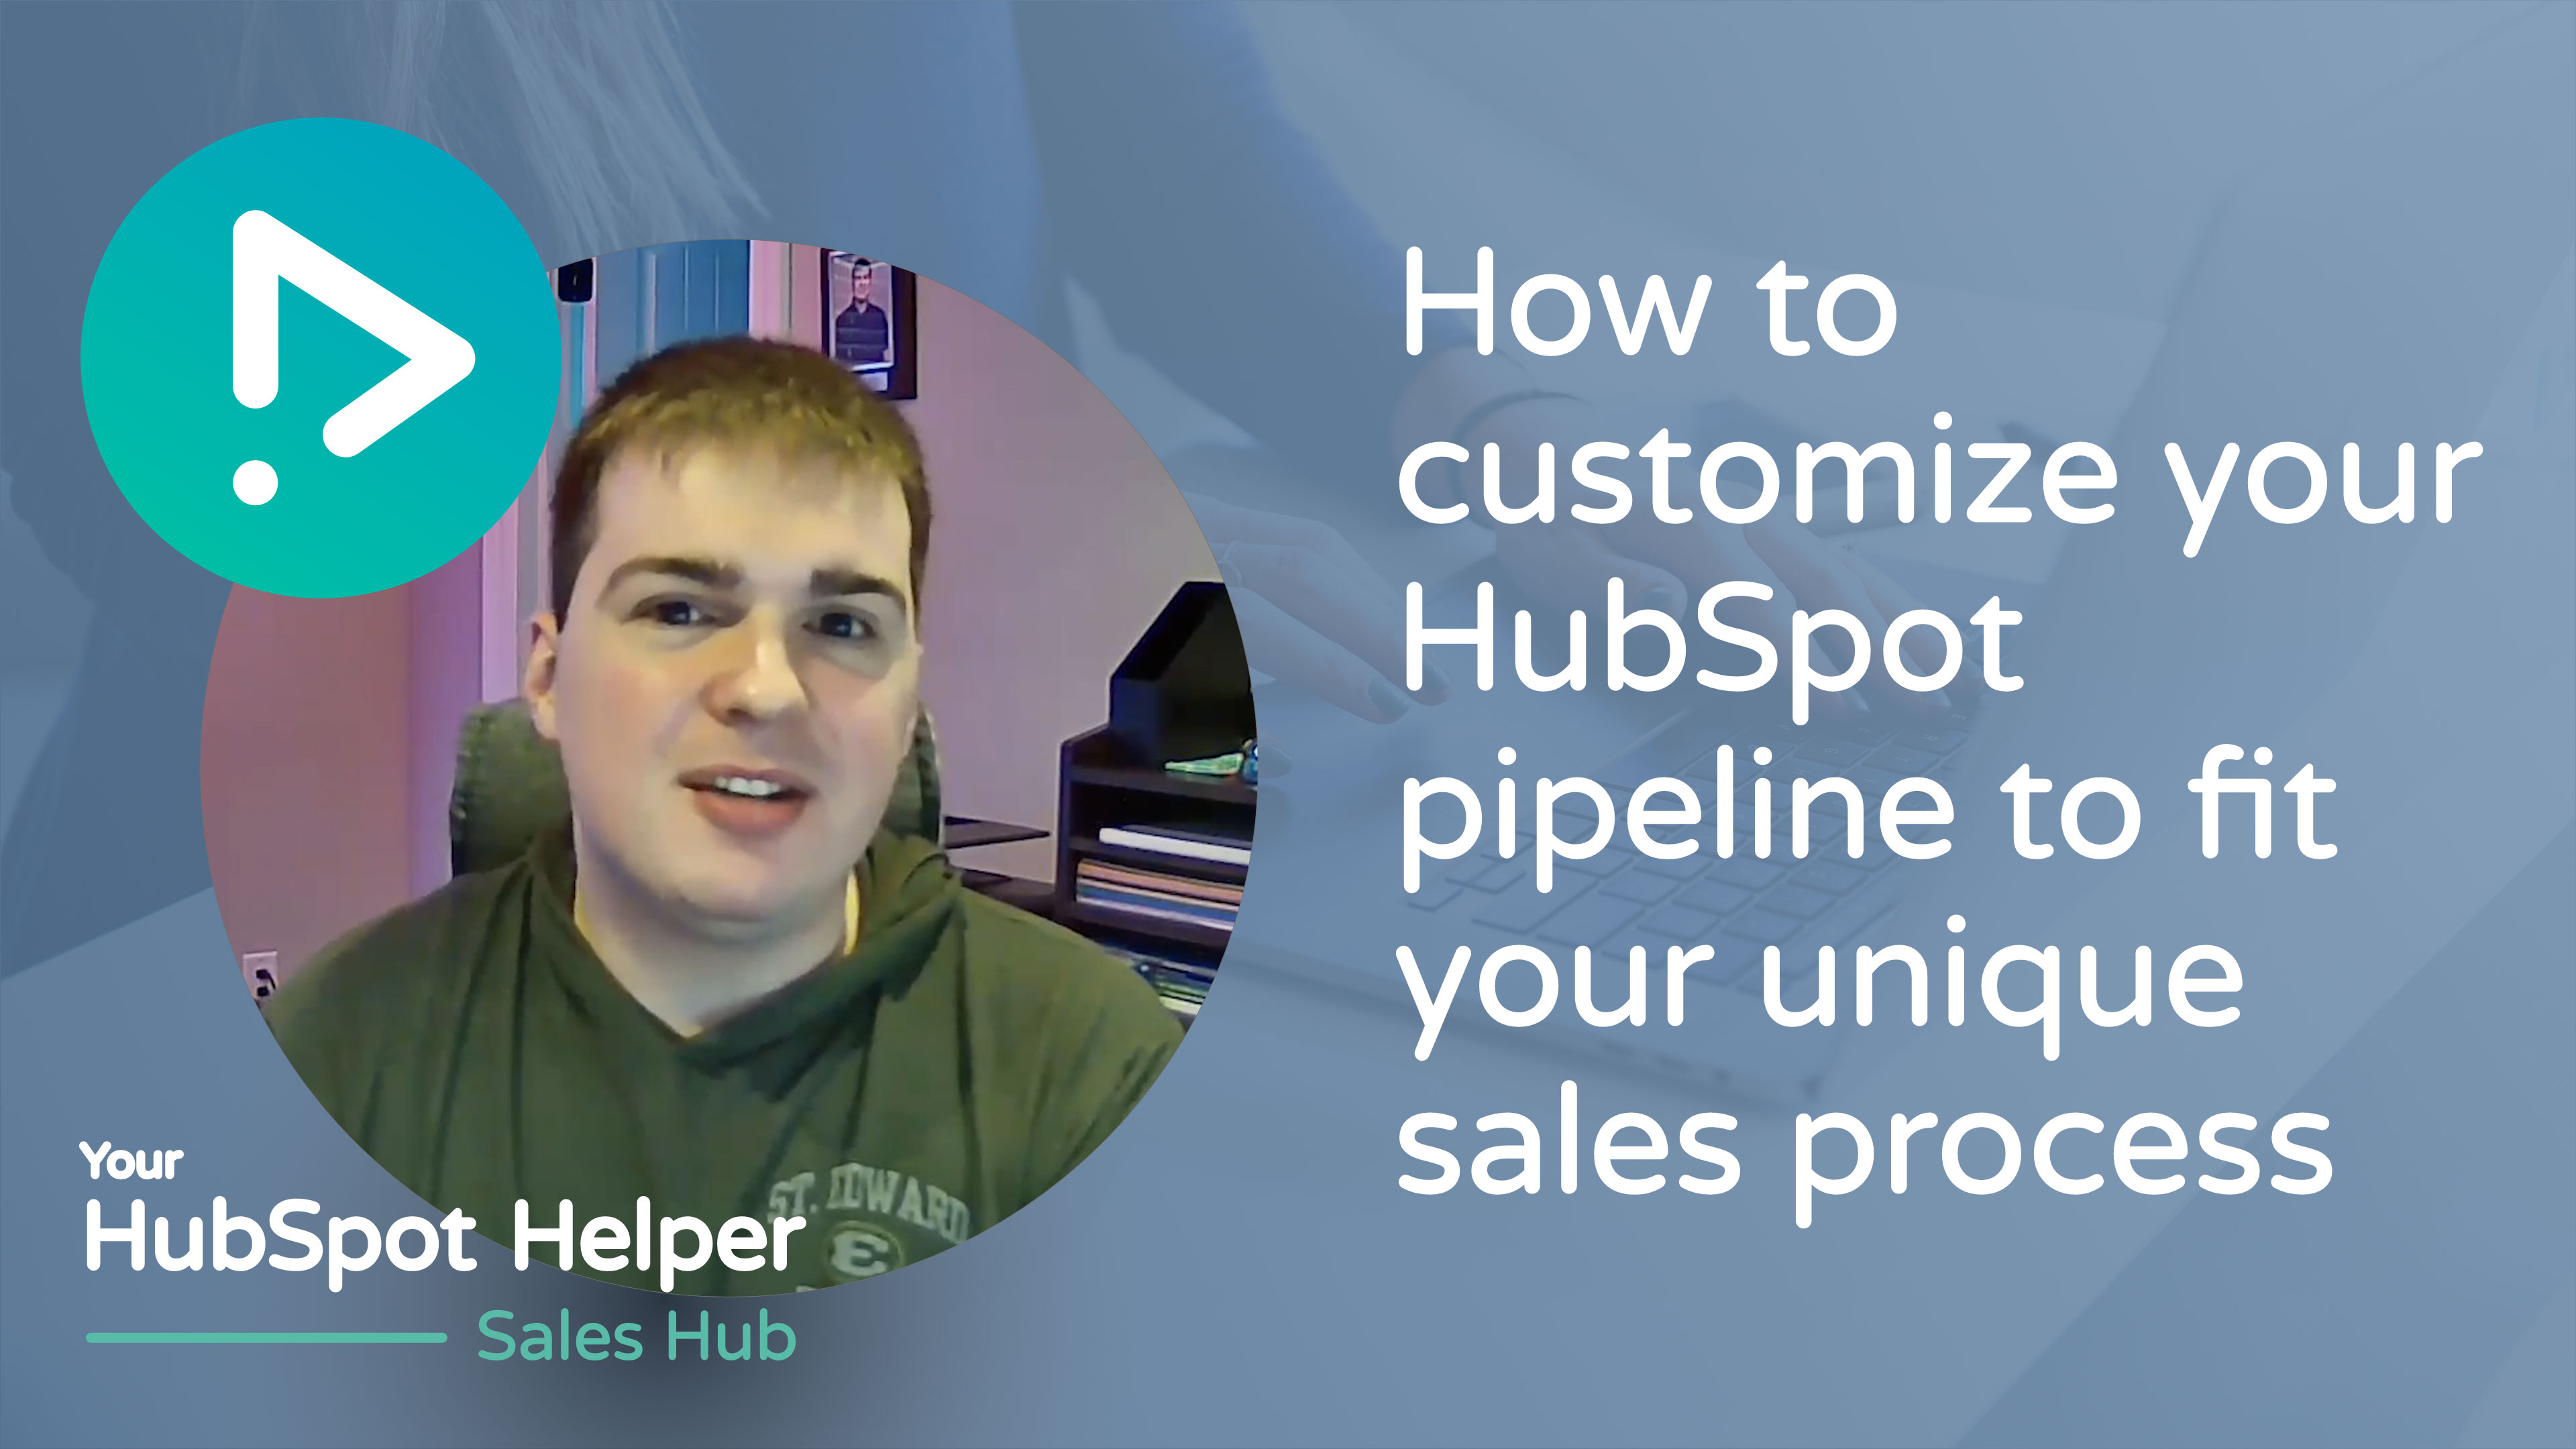 How to customize your HubSpot pipeline to fit your unique sales process